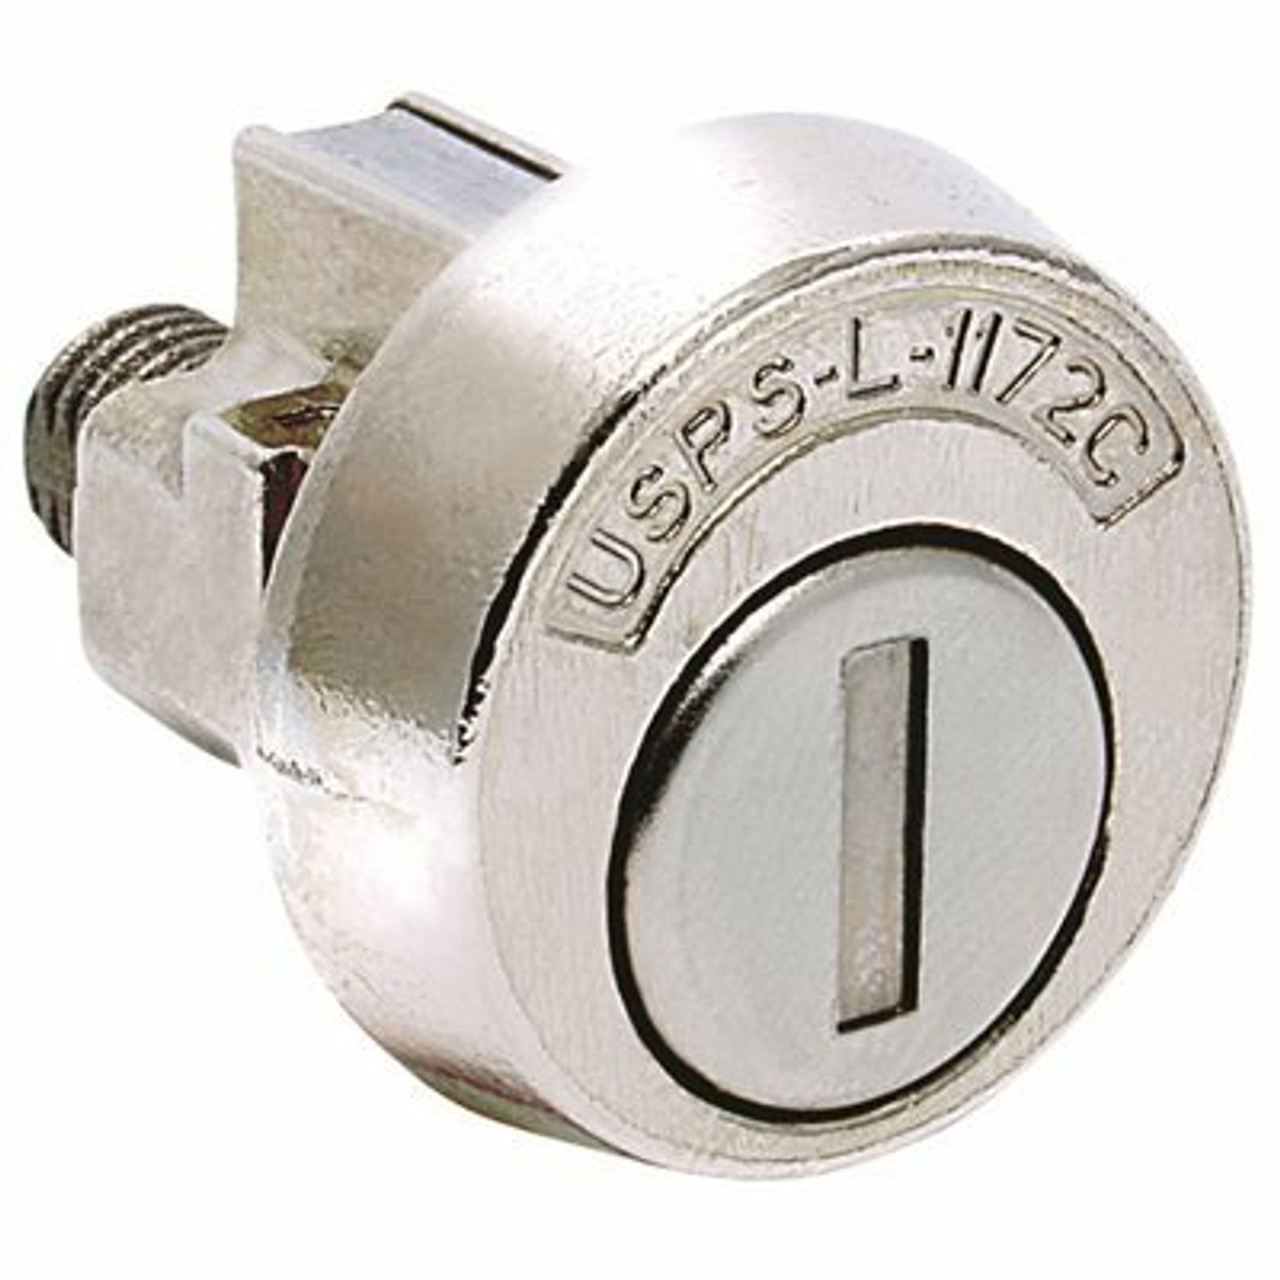 Compx Security Compx National Mailbox Lock 4C Style Counter Clockwise